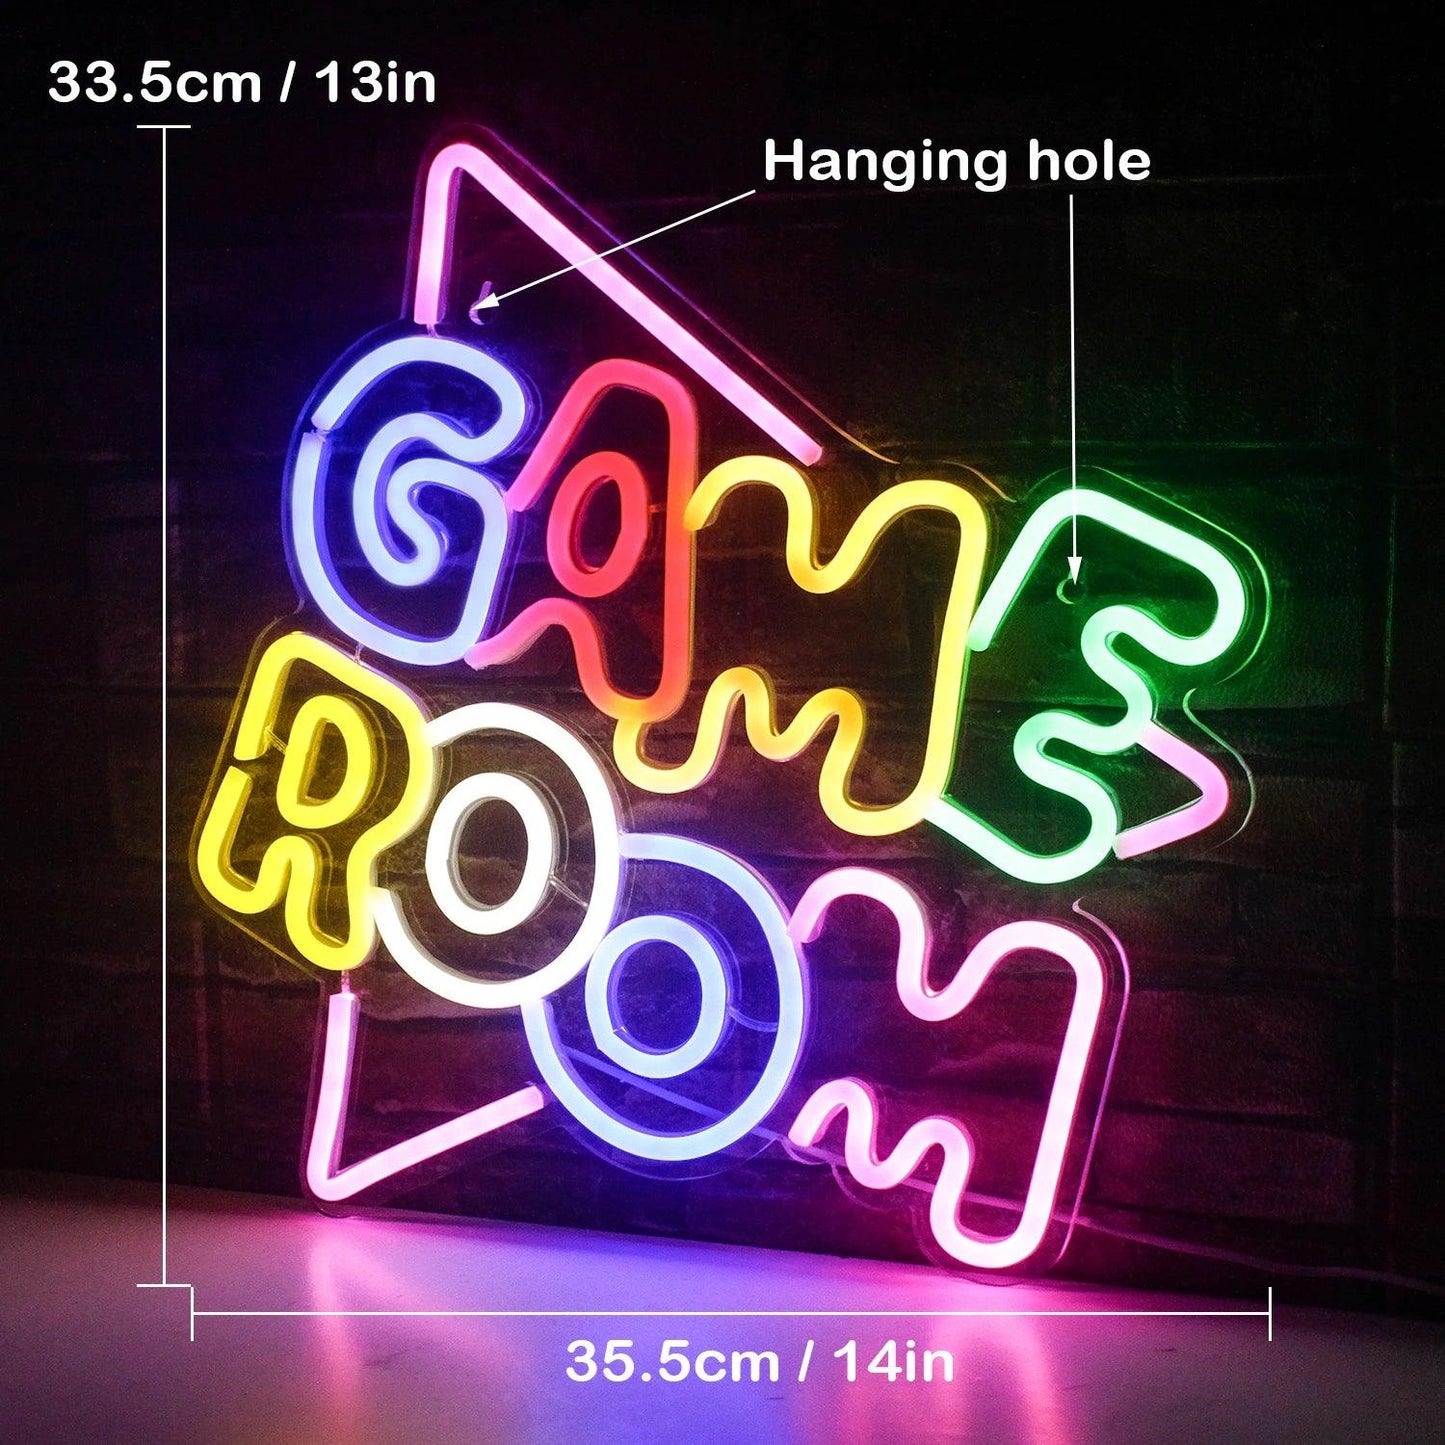 Neon LED Signs - The Cozy Cubicle